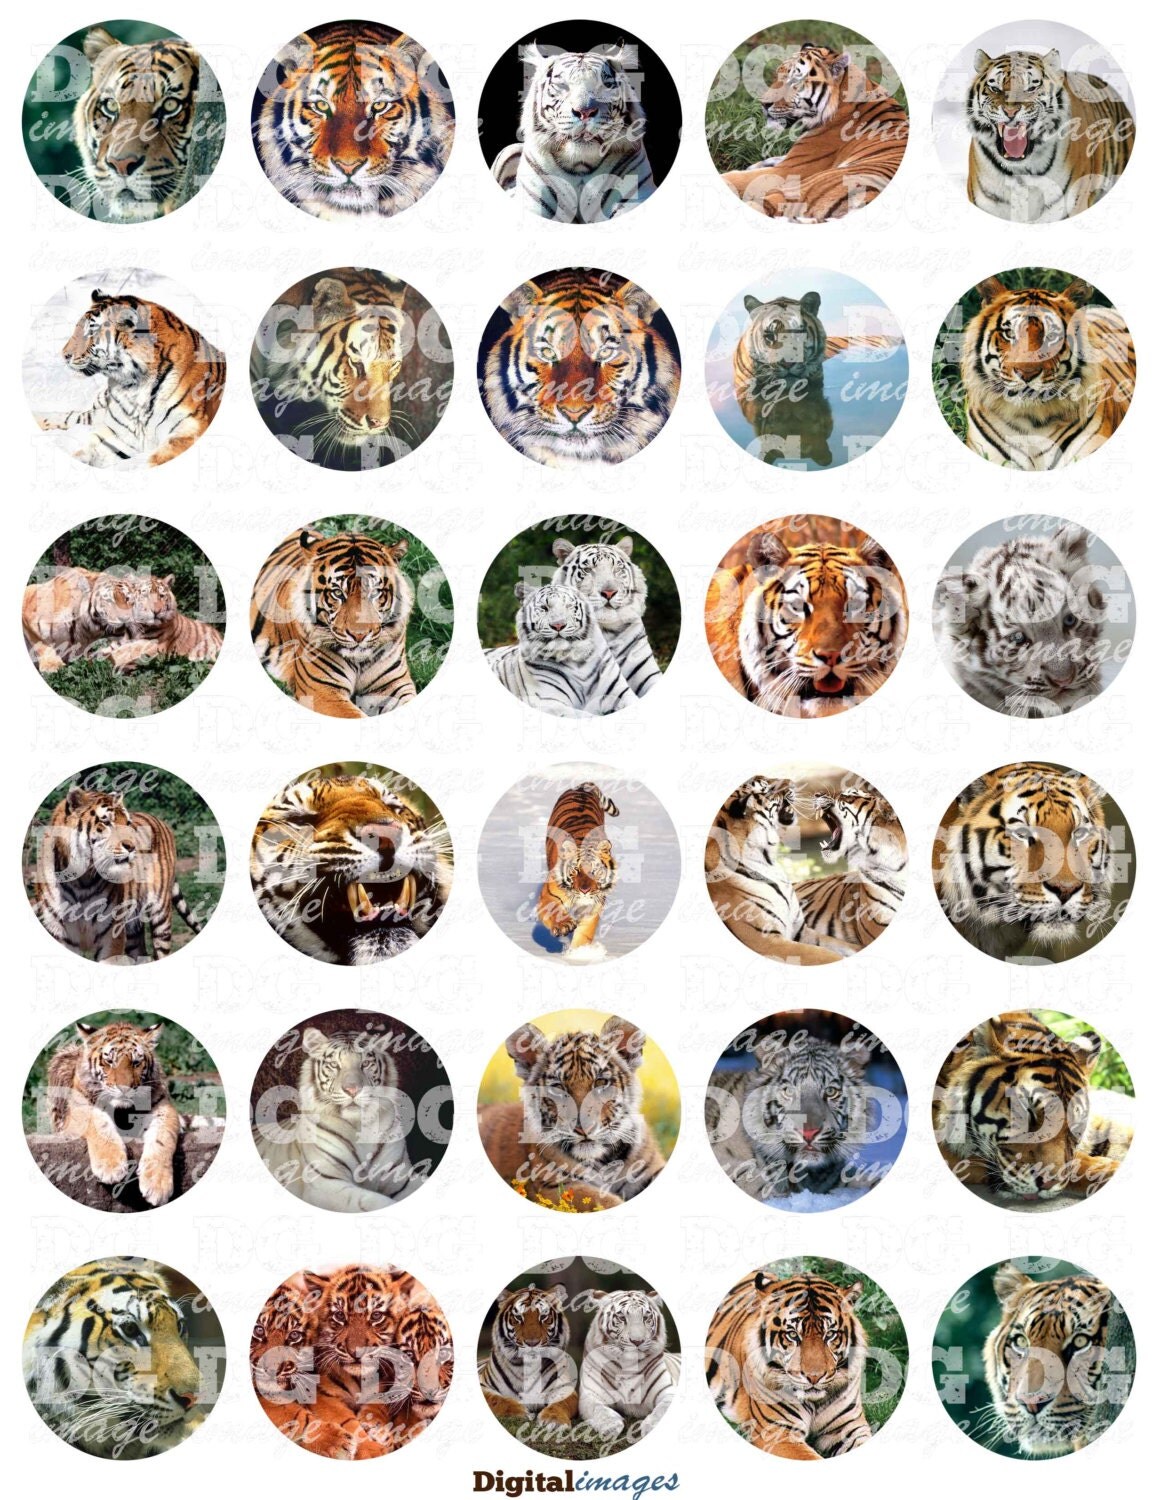 Tigers Circle Collage Sheet 1/2 20mm 1 15 2 12mm 20mm by DGImage